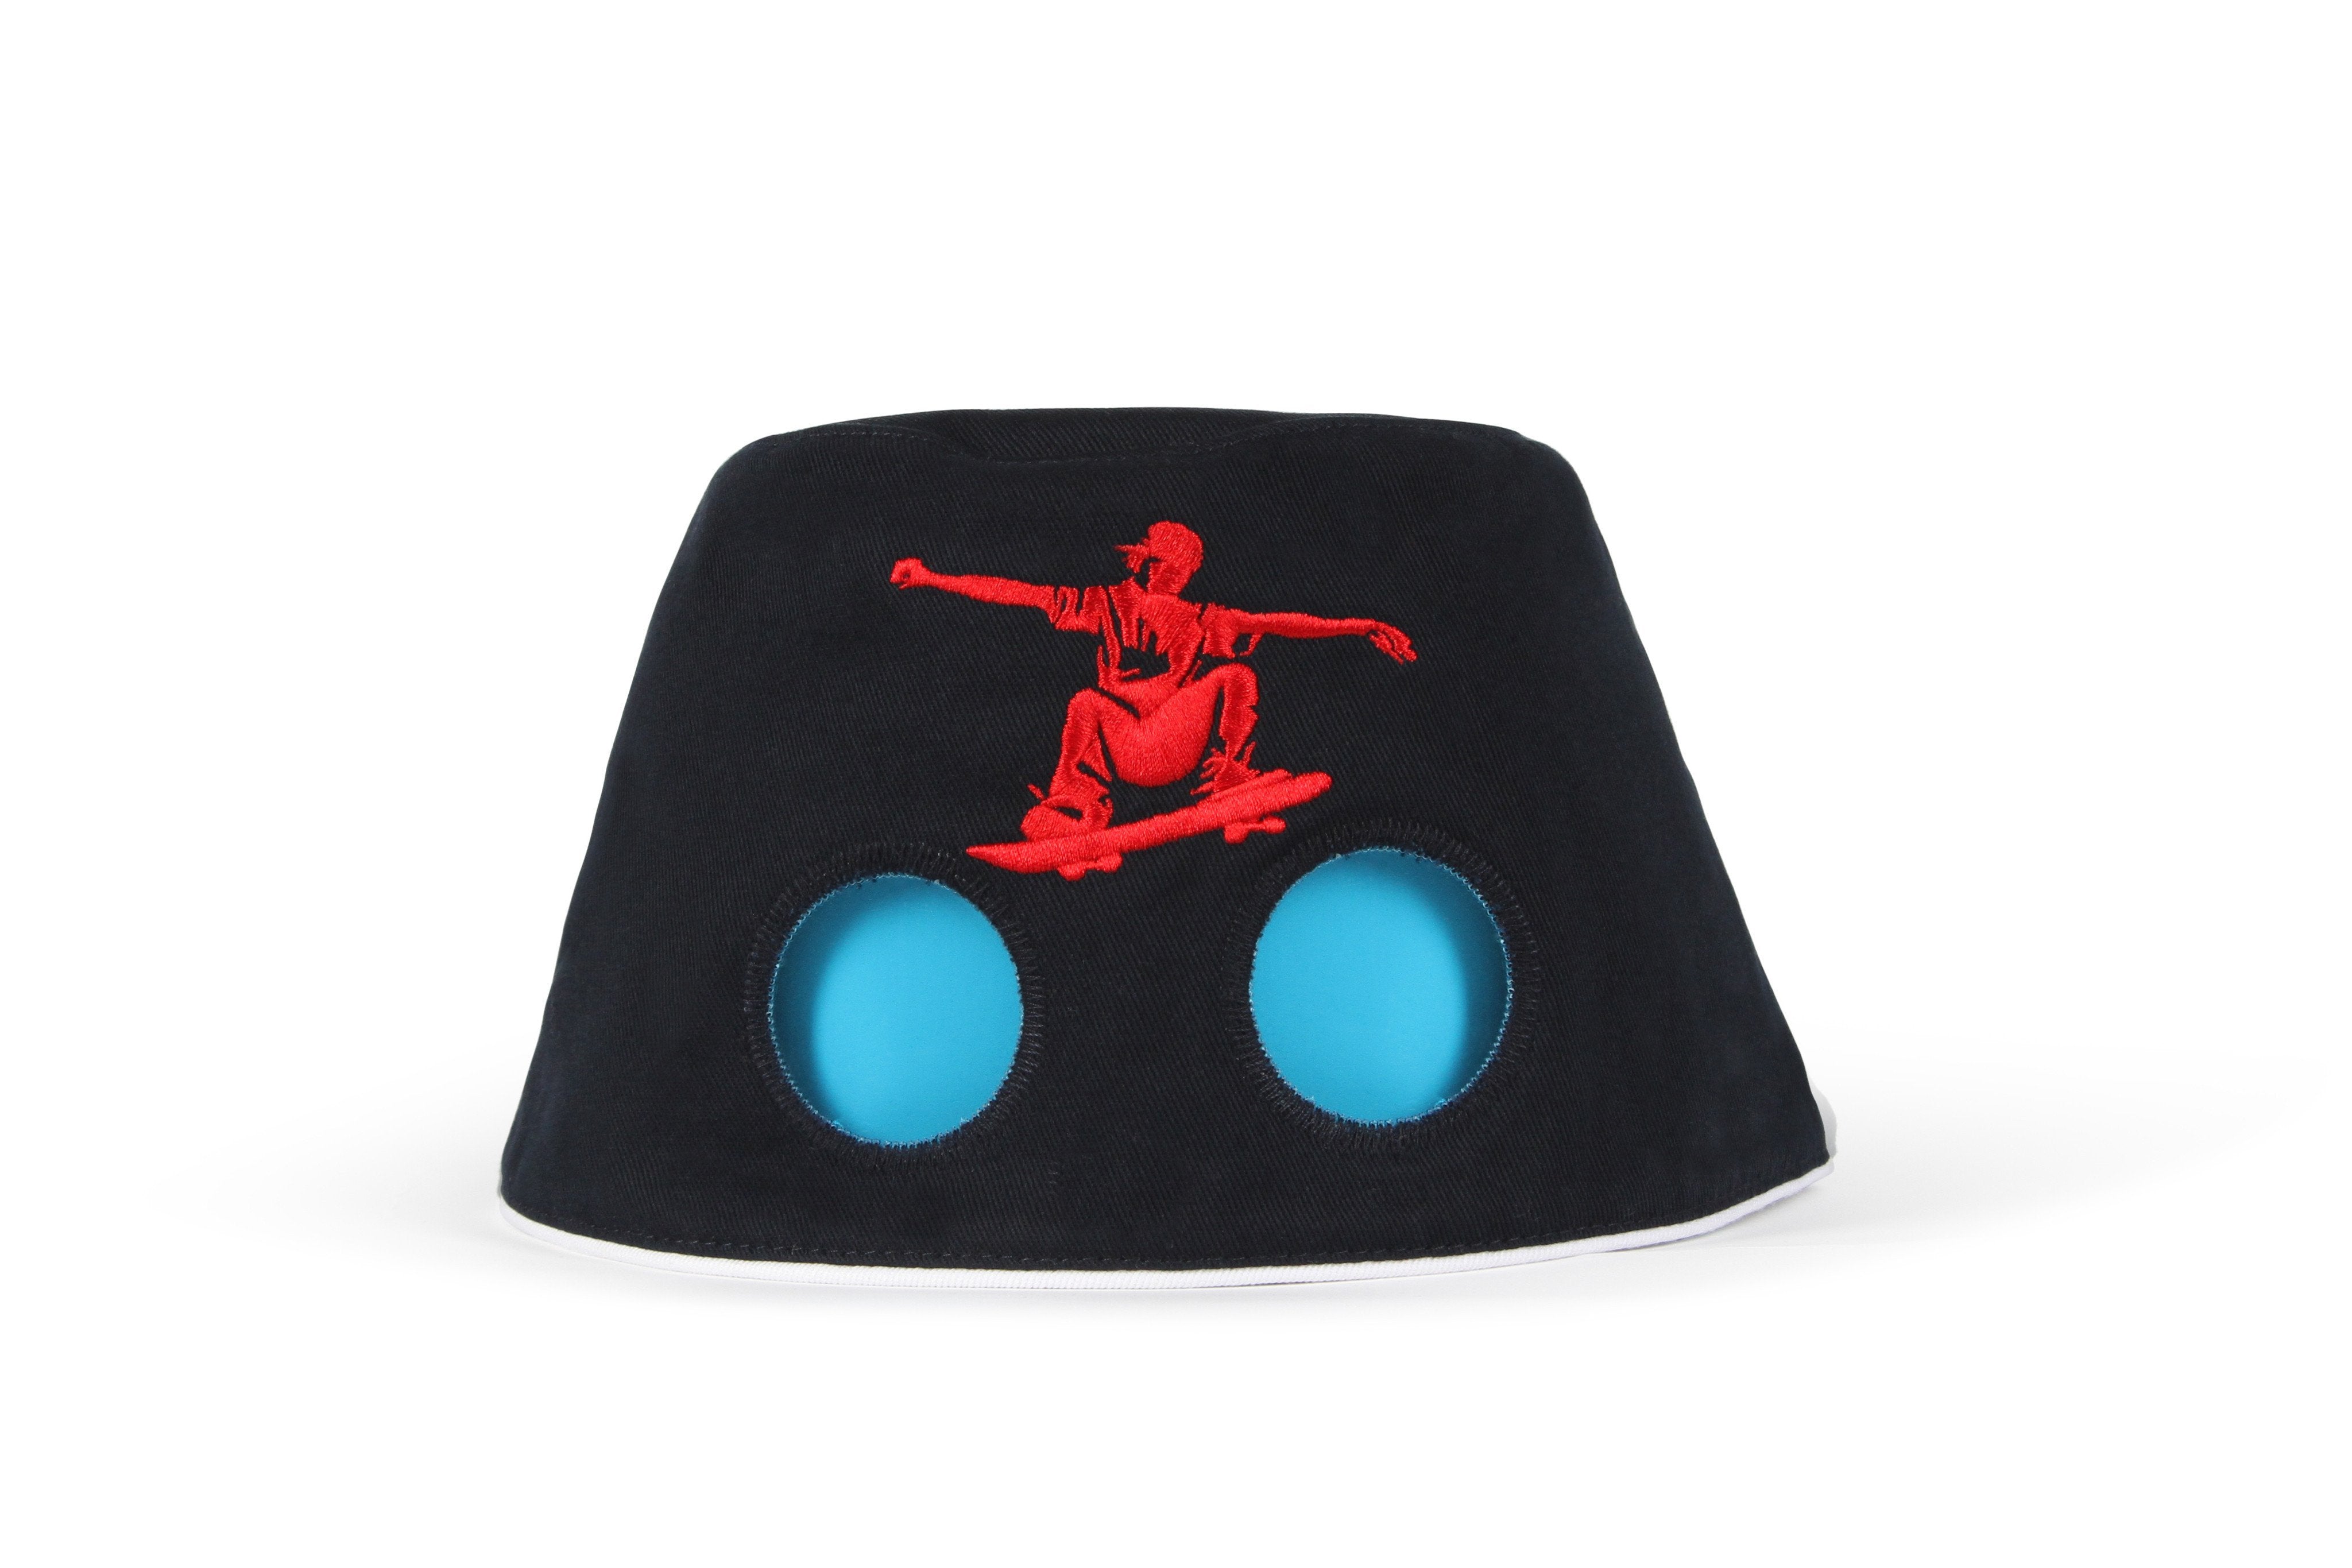 COOEEE Skater Sunglasses Hat Black and Red with Blue Lenses by Boomerang Baby